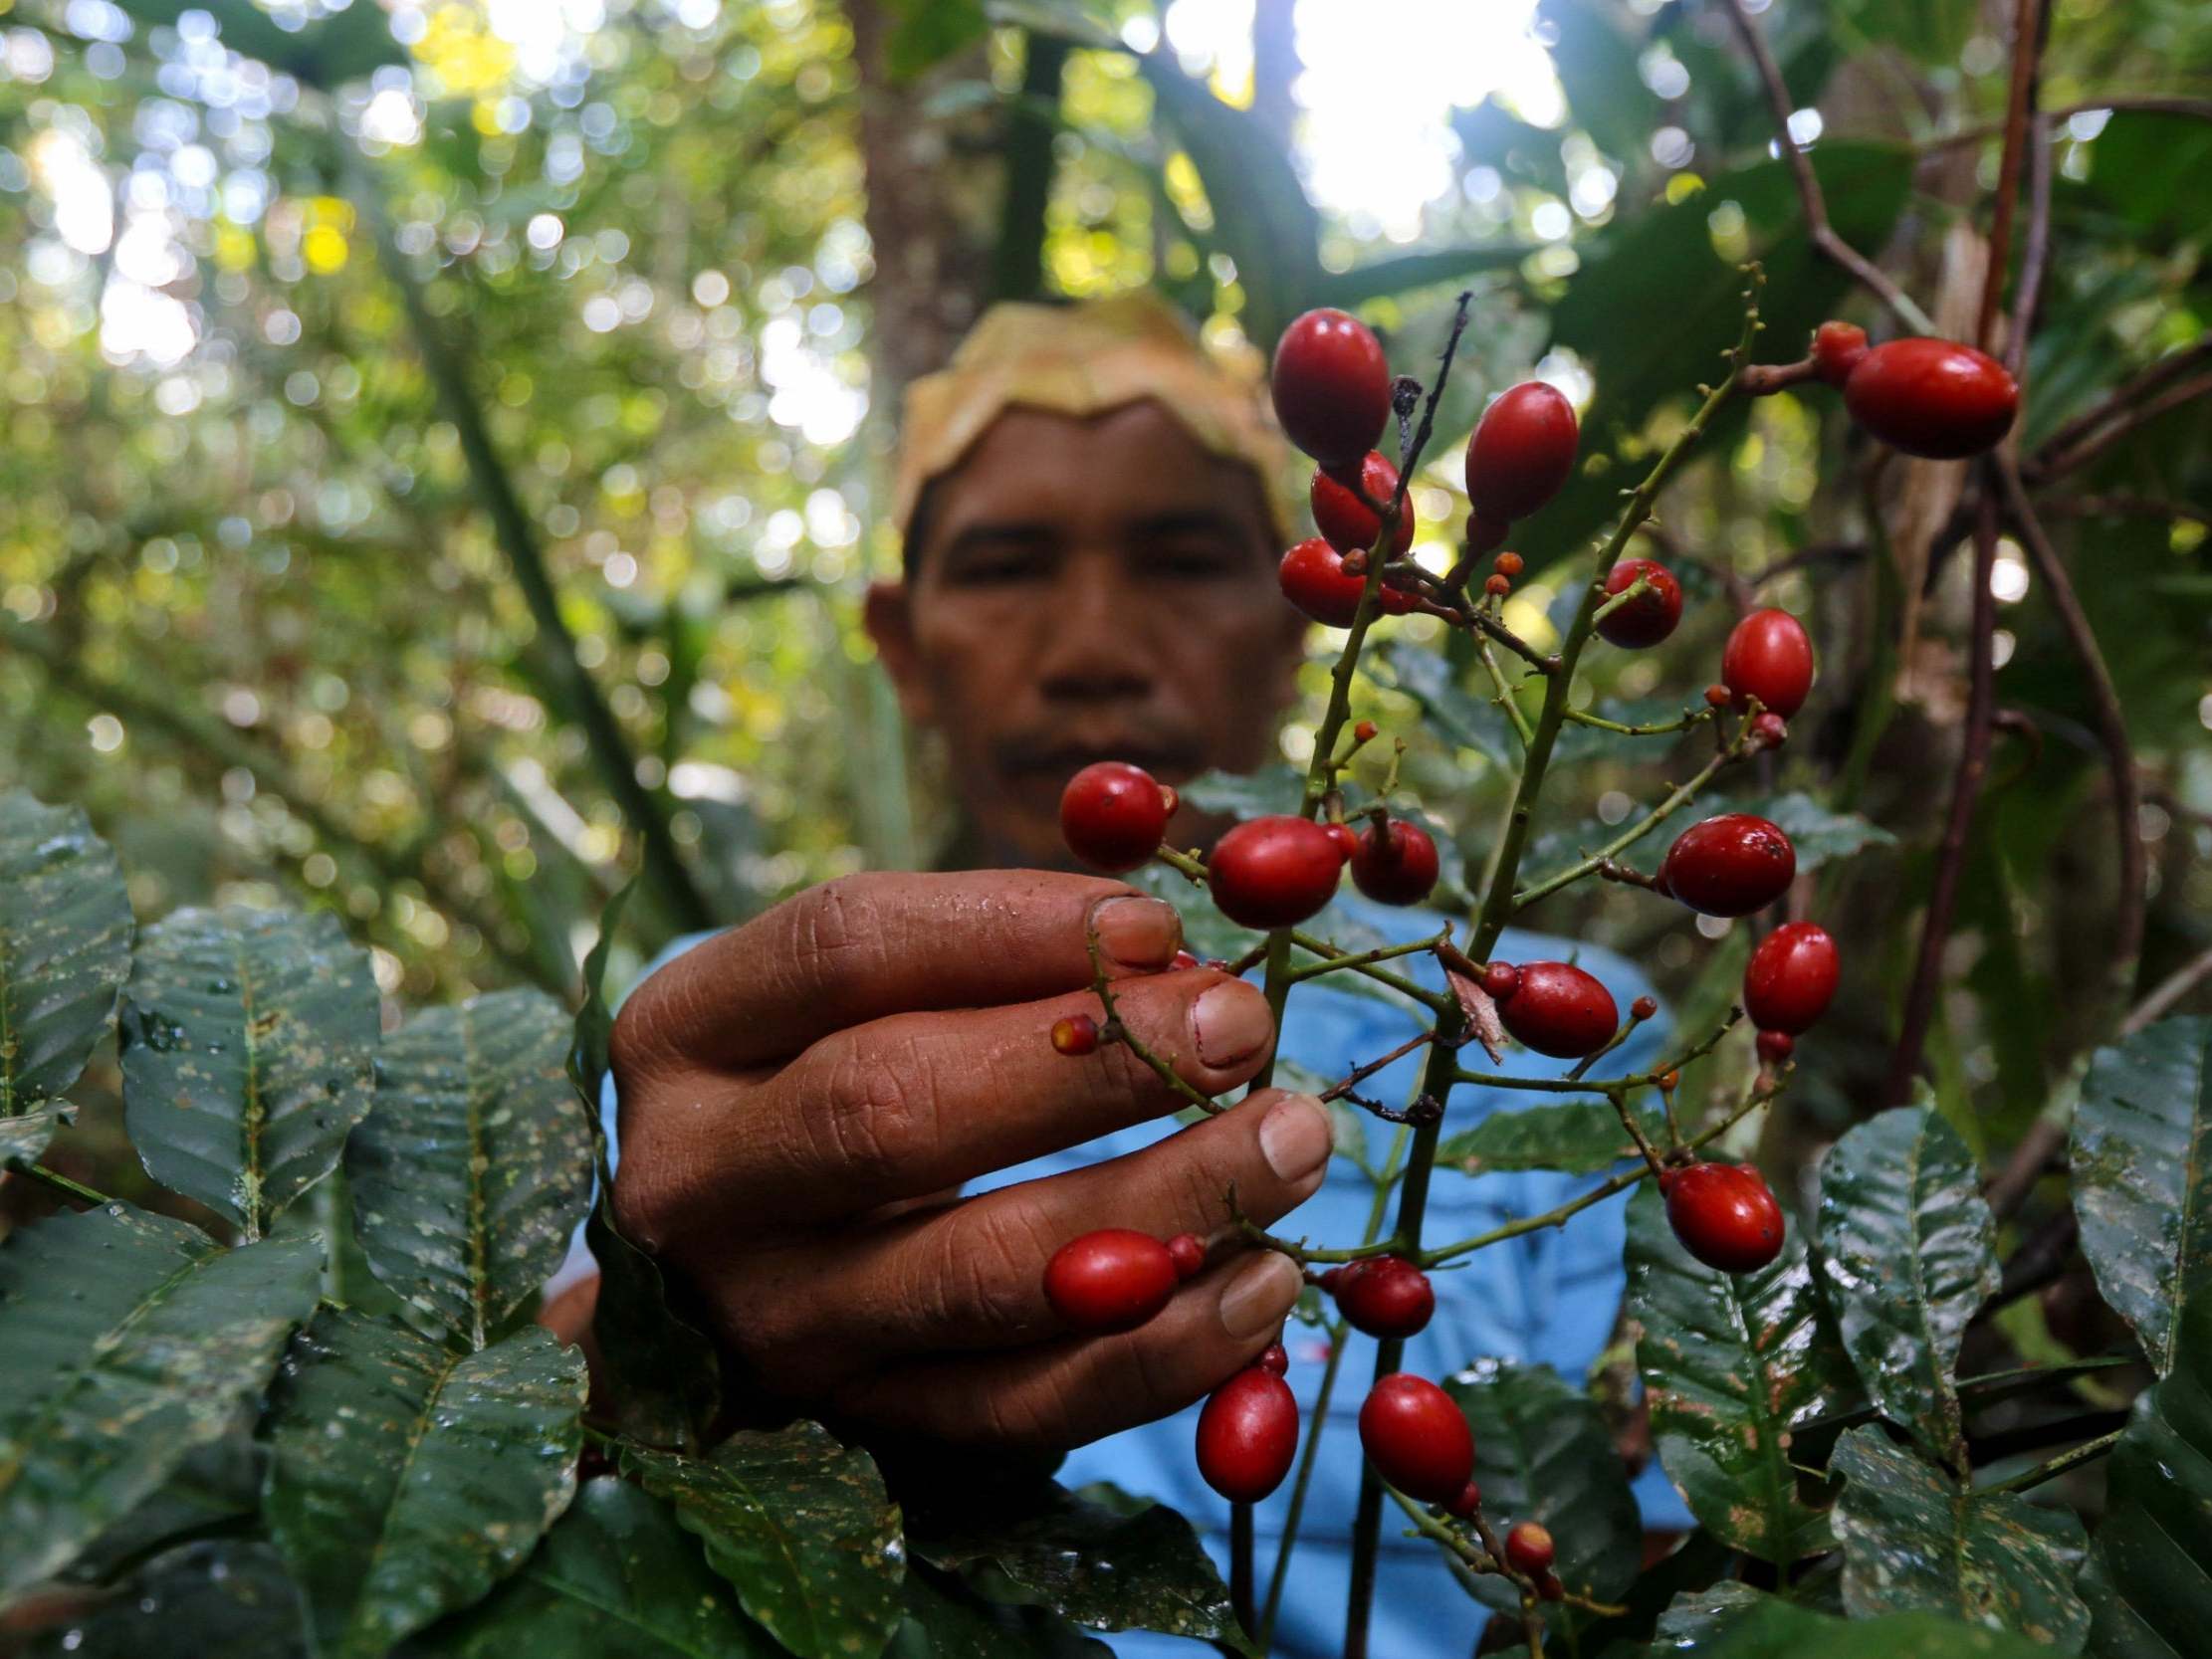 Valdiney Satere, 43, collects the native plant caferana to treat people showing symptoms of Covid-19.